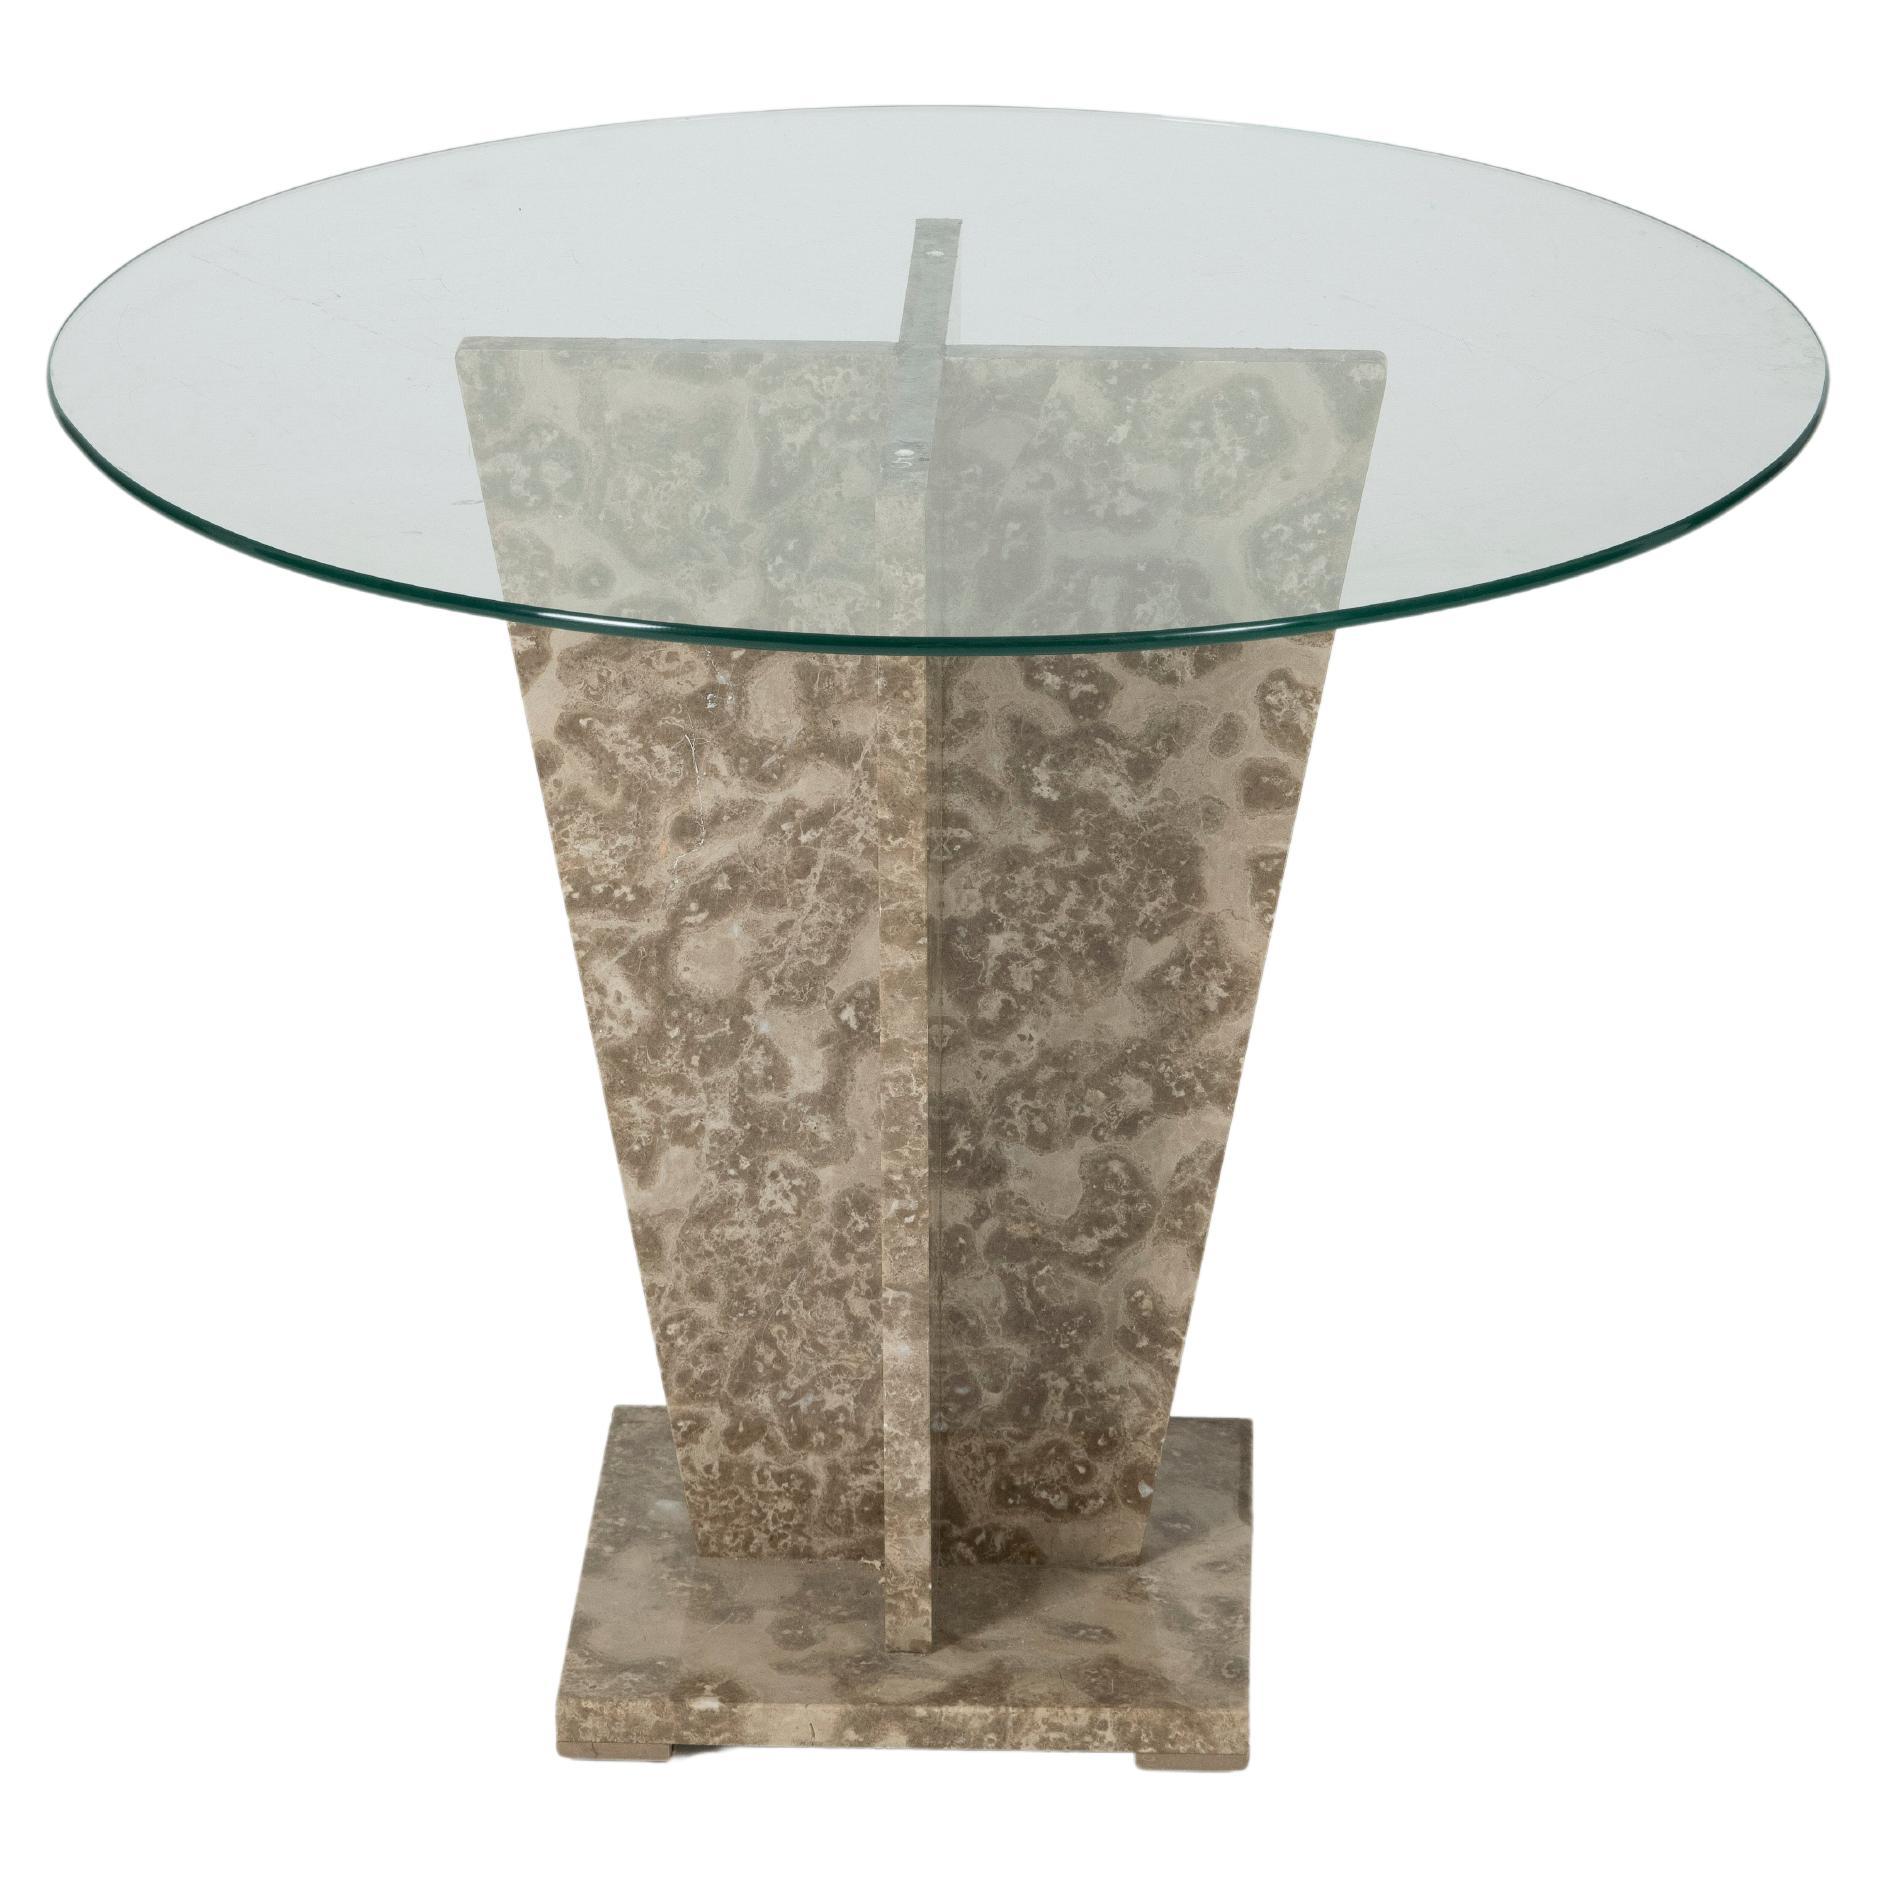 Side table with marble base and glass top, 1970s. Very good condition.
LP690